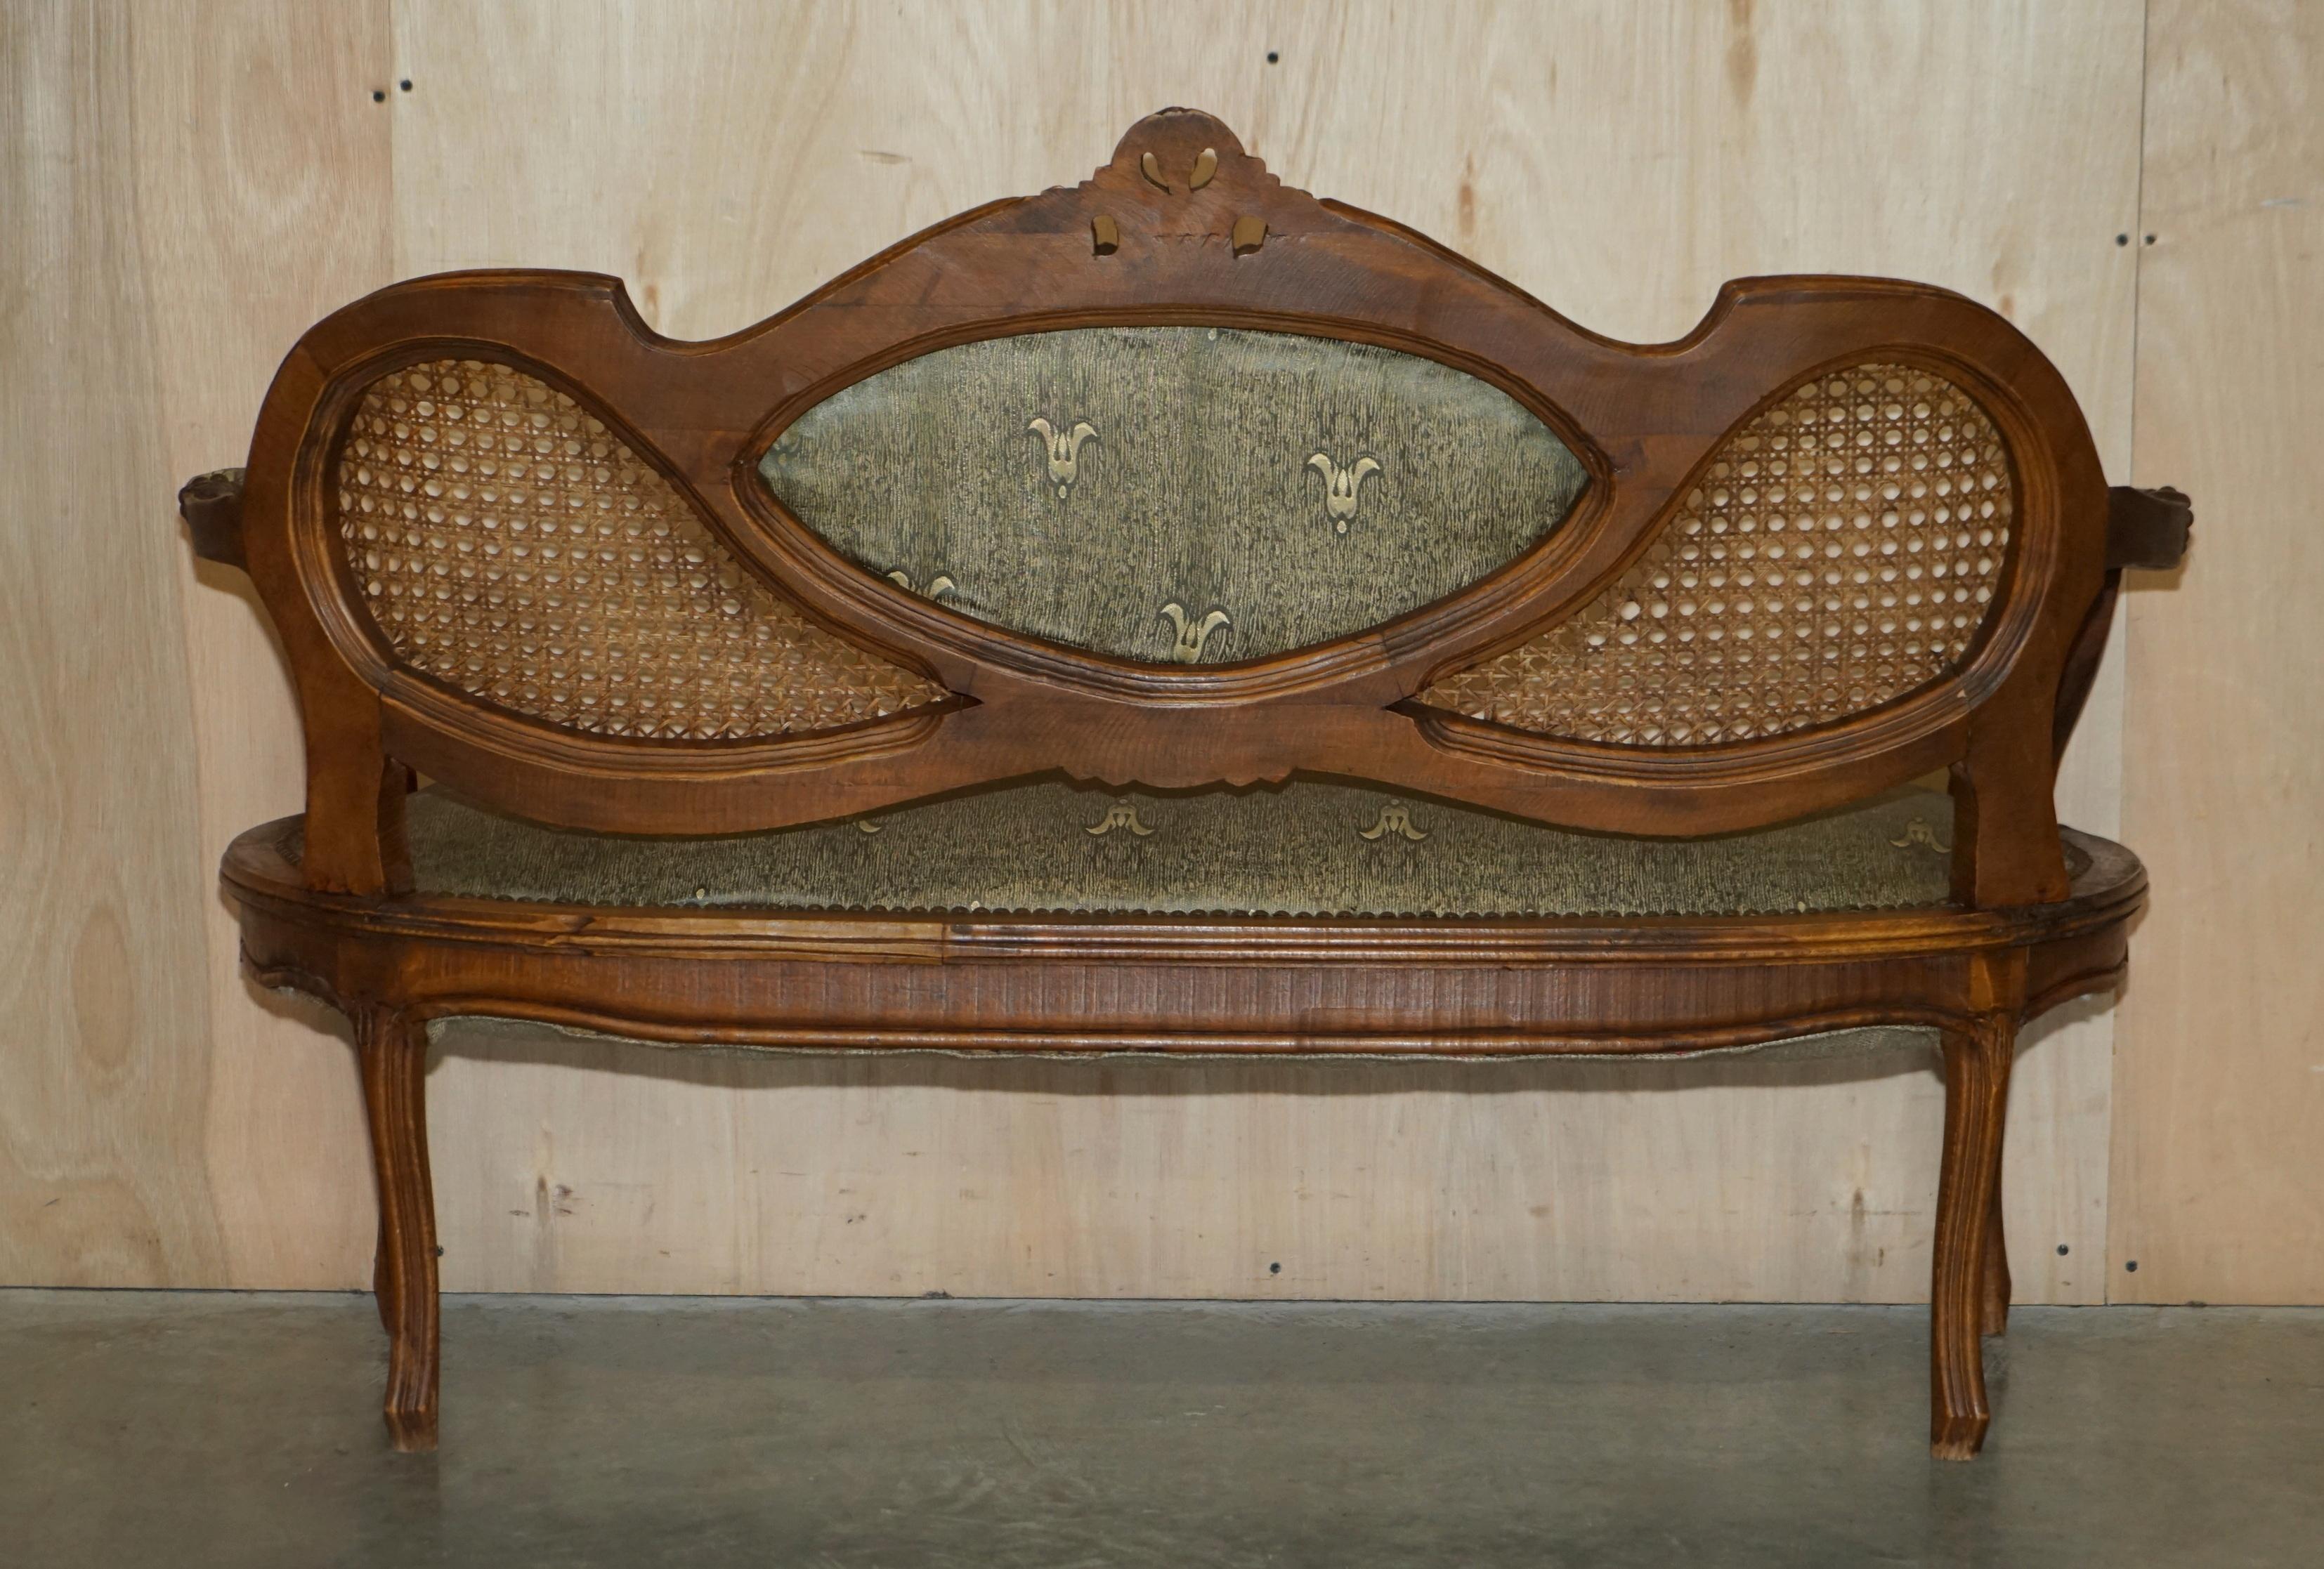 LOVELY ANTIQUE NAPOLEON III CIRCA 1890 BERGERE WiNDOW SEAT BENCH SETTEE SOFA For Sale 12